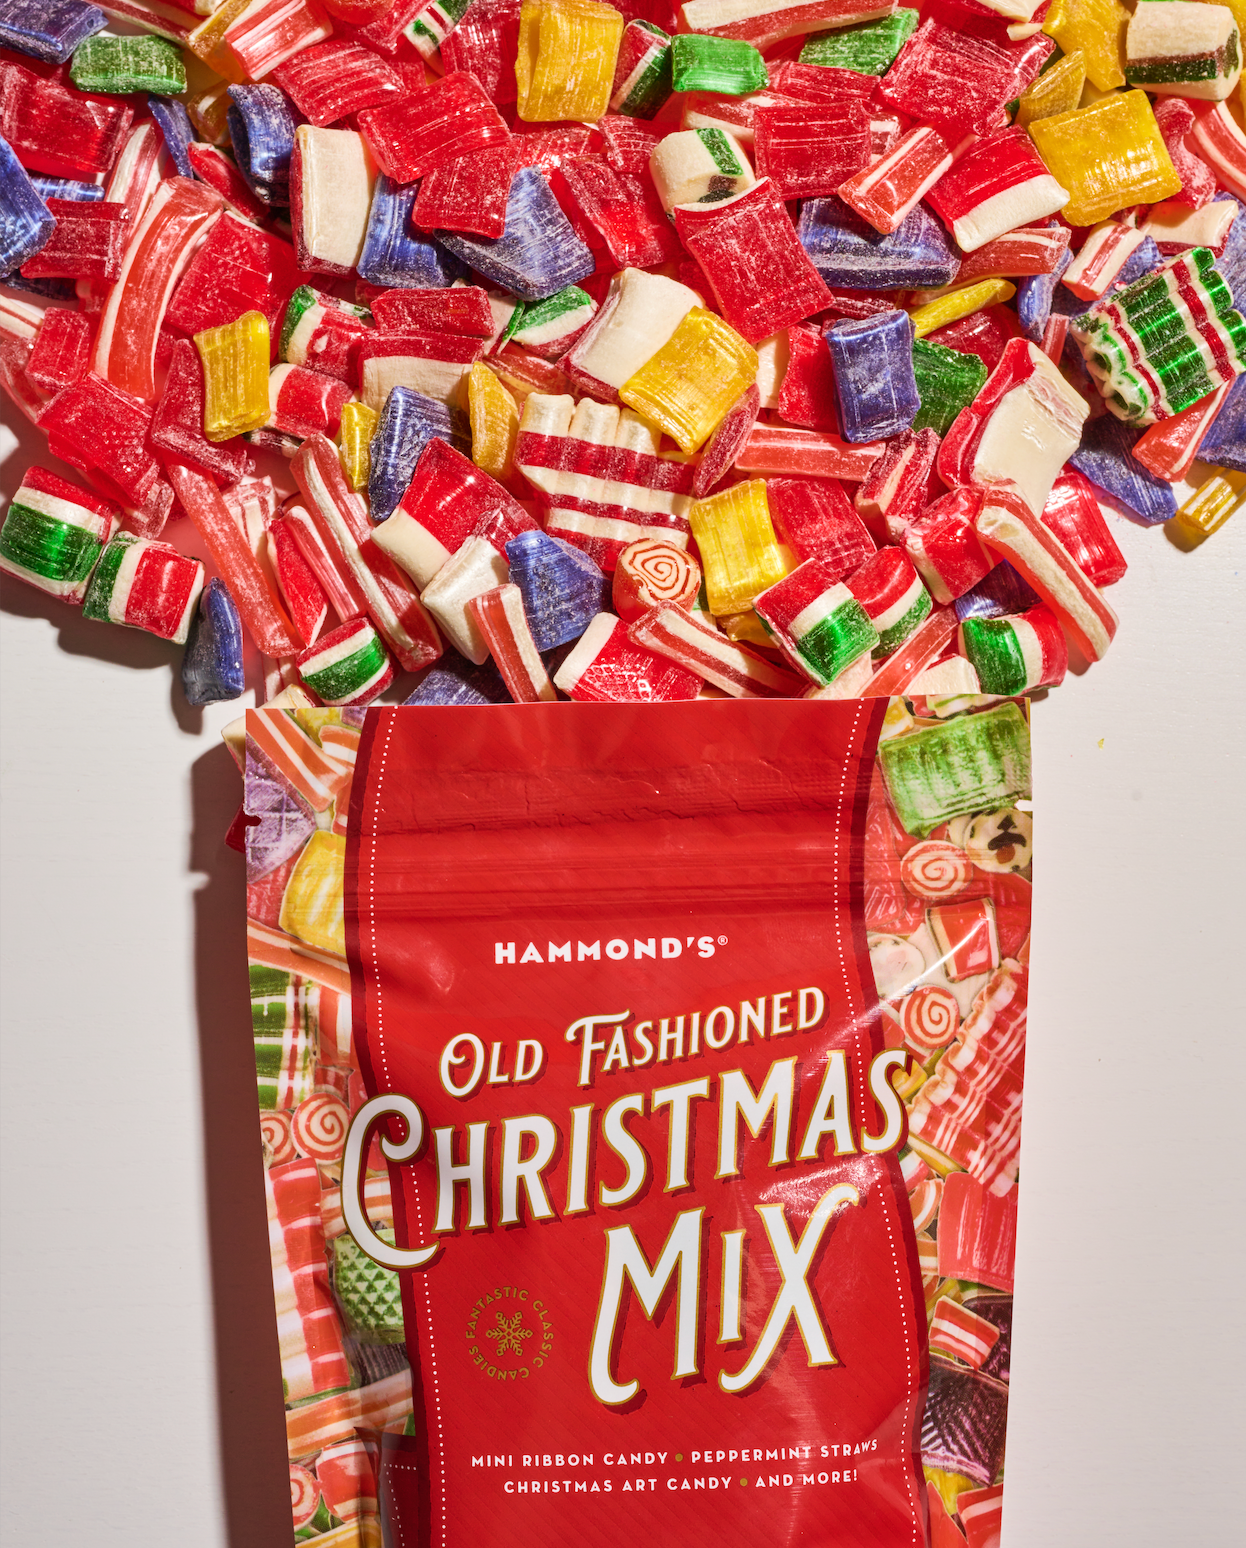 Old Fashioned Christmas Mix